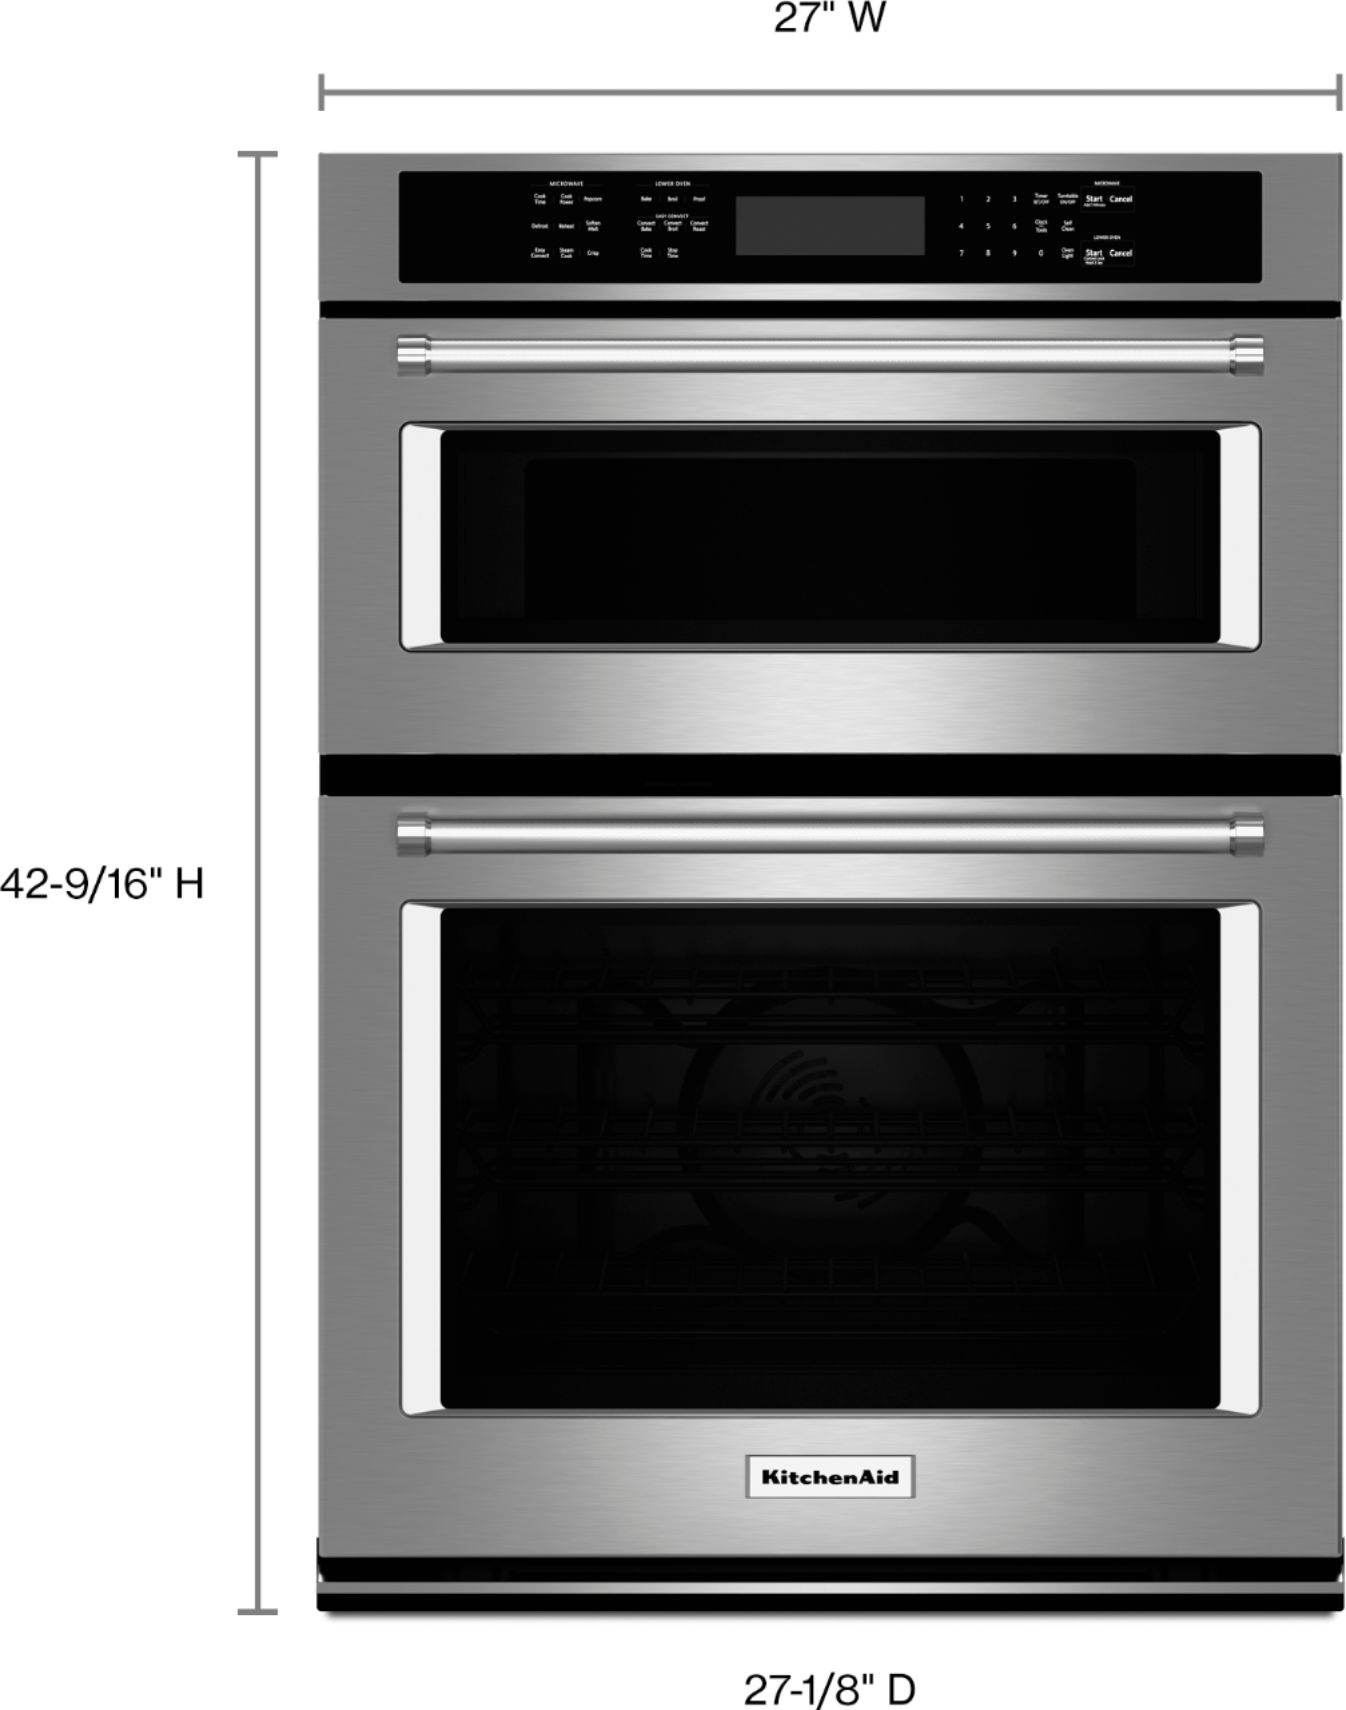 Microwave Convection Oven 24 WideBestMicrowave